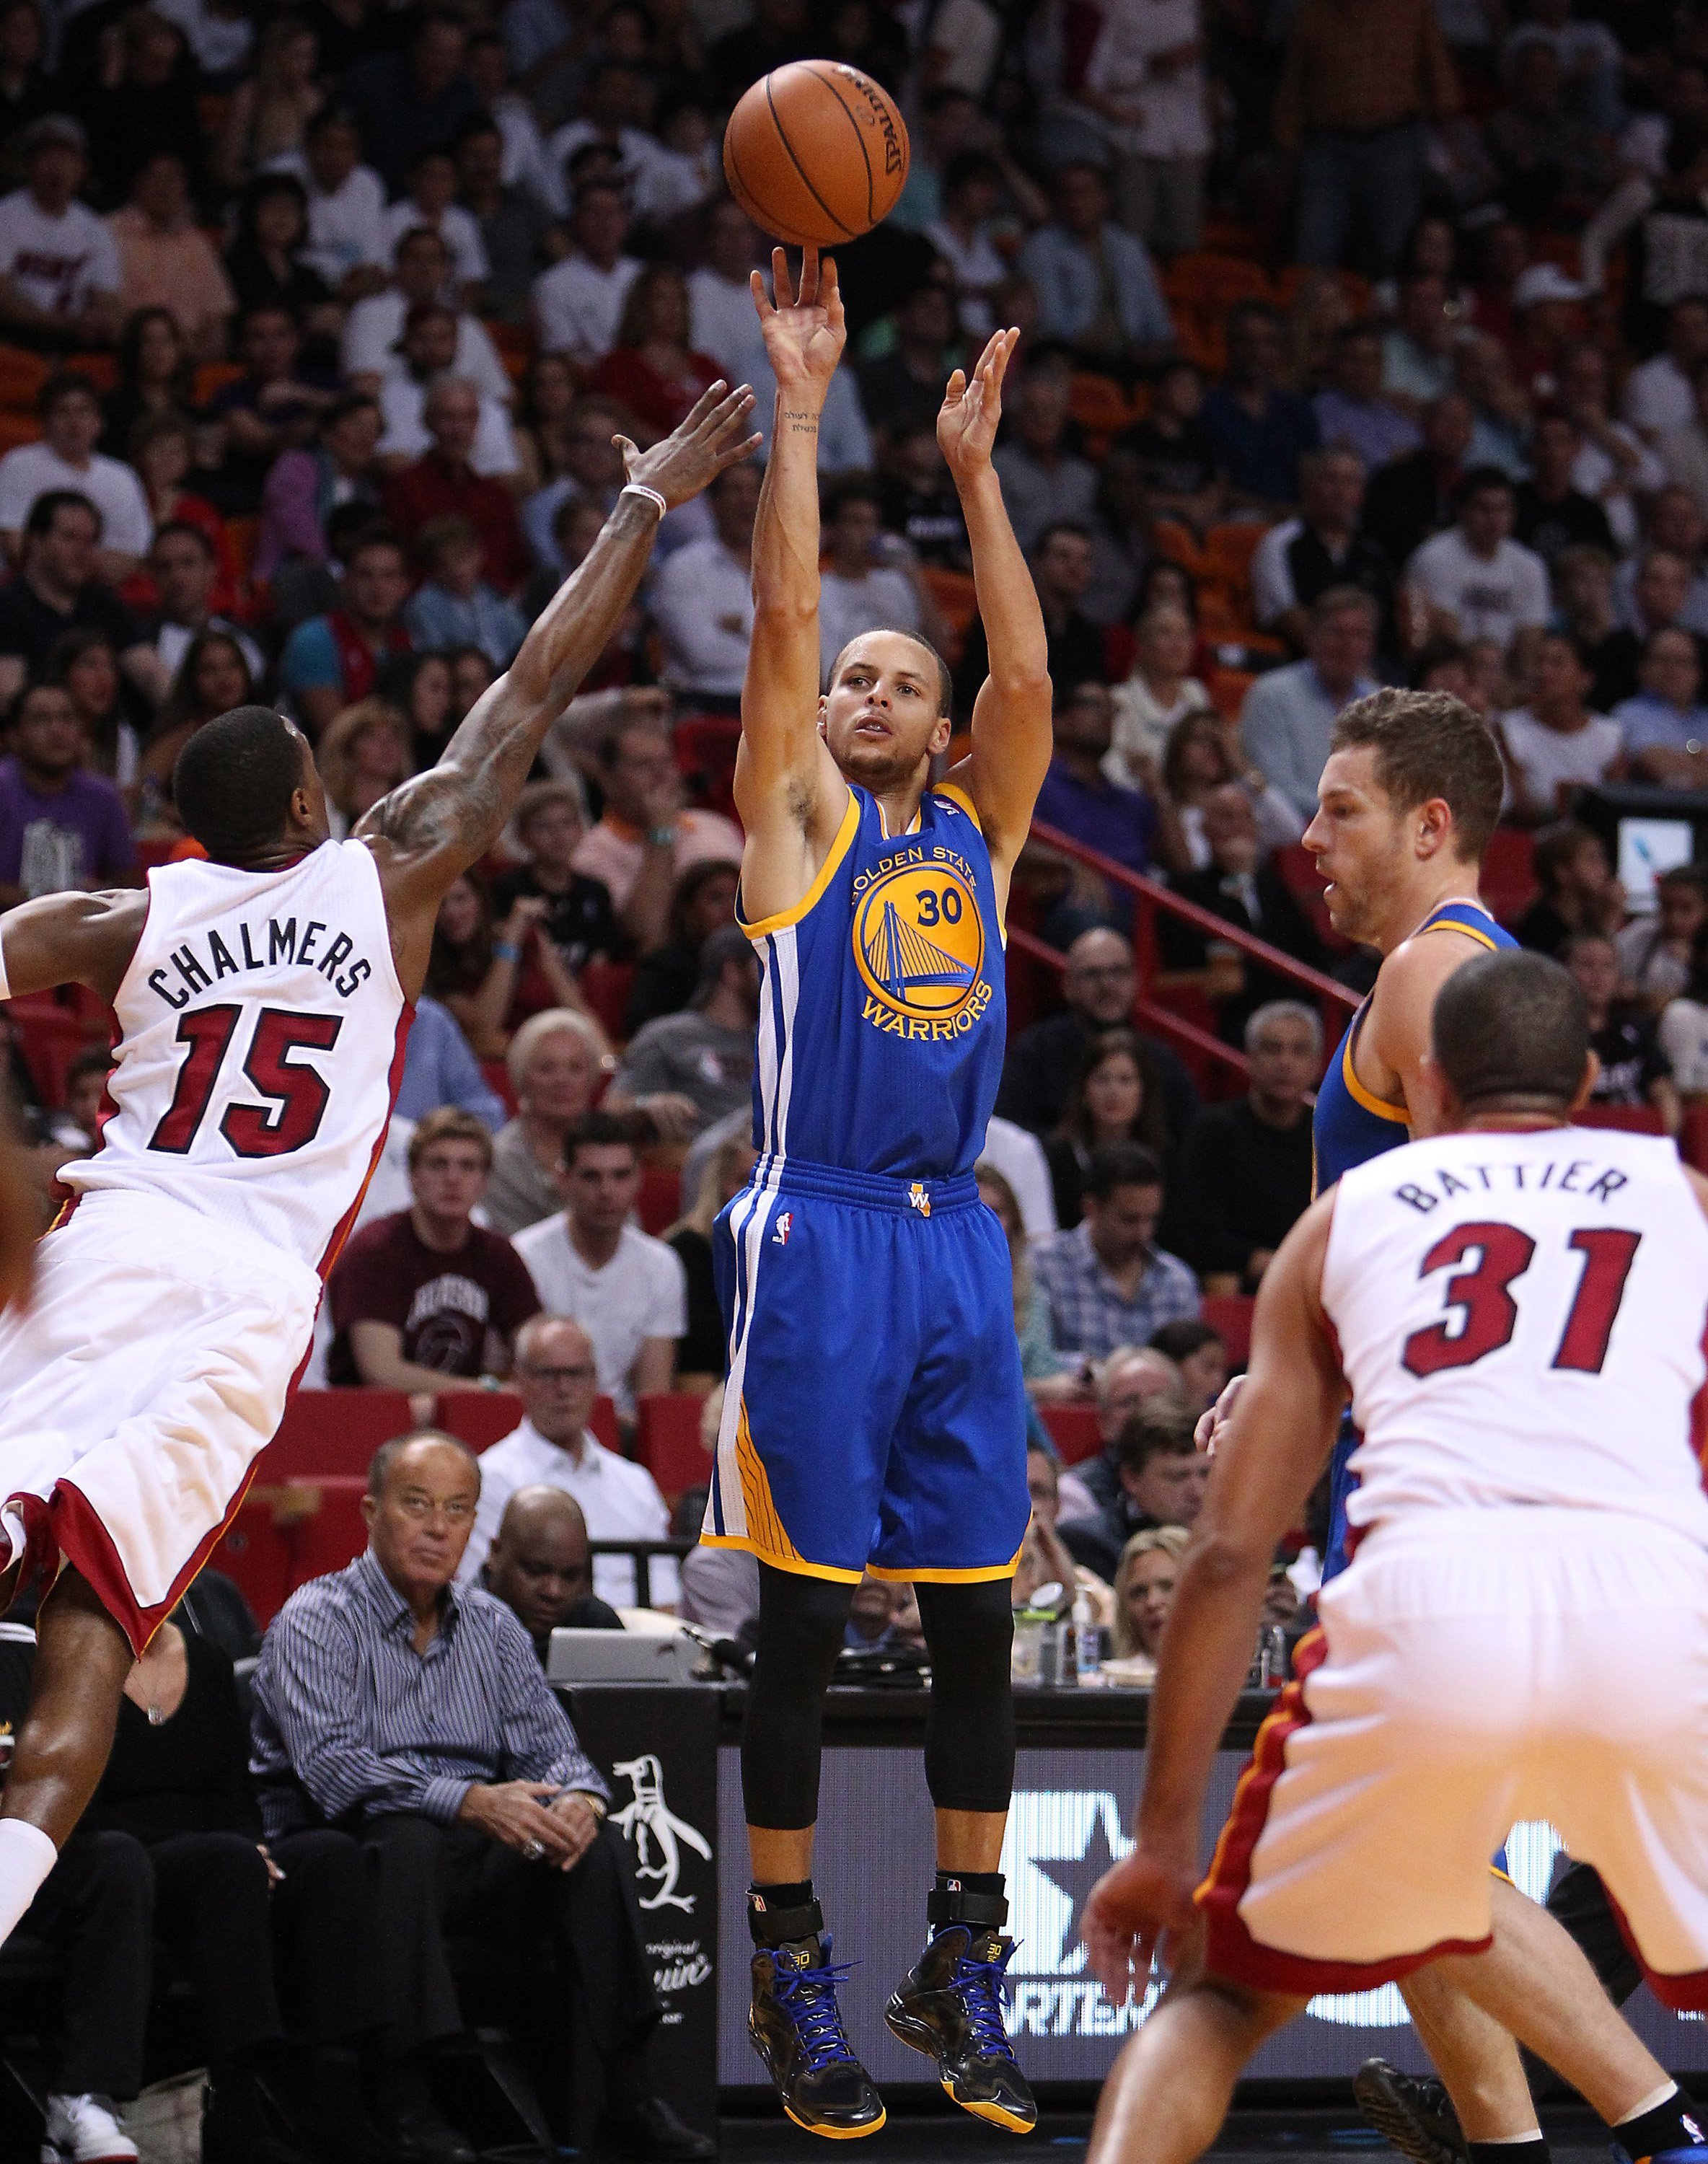 Golden State Warriors guard Stephen Curry shoots over Miami Heat guard Mario Chalmers during the first quarter at AmericanAirlines Arena in Miami on Thursday, Jan. 2, 2014. (El Nuevo Herald—MCT/Getty Images)